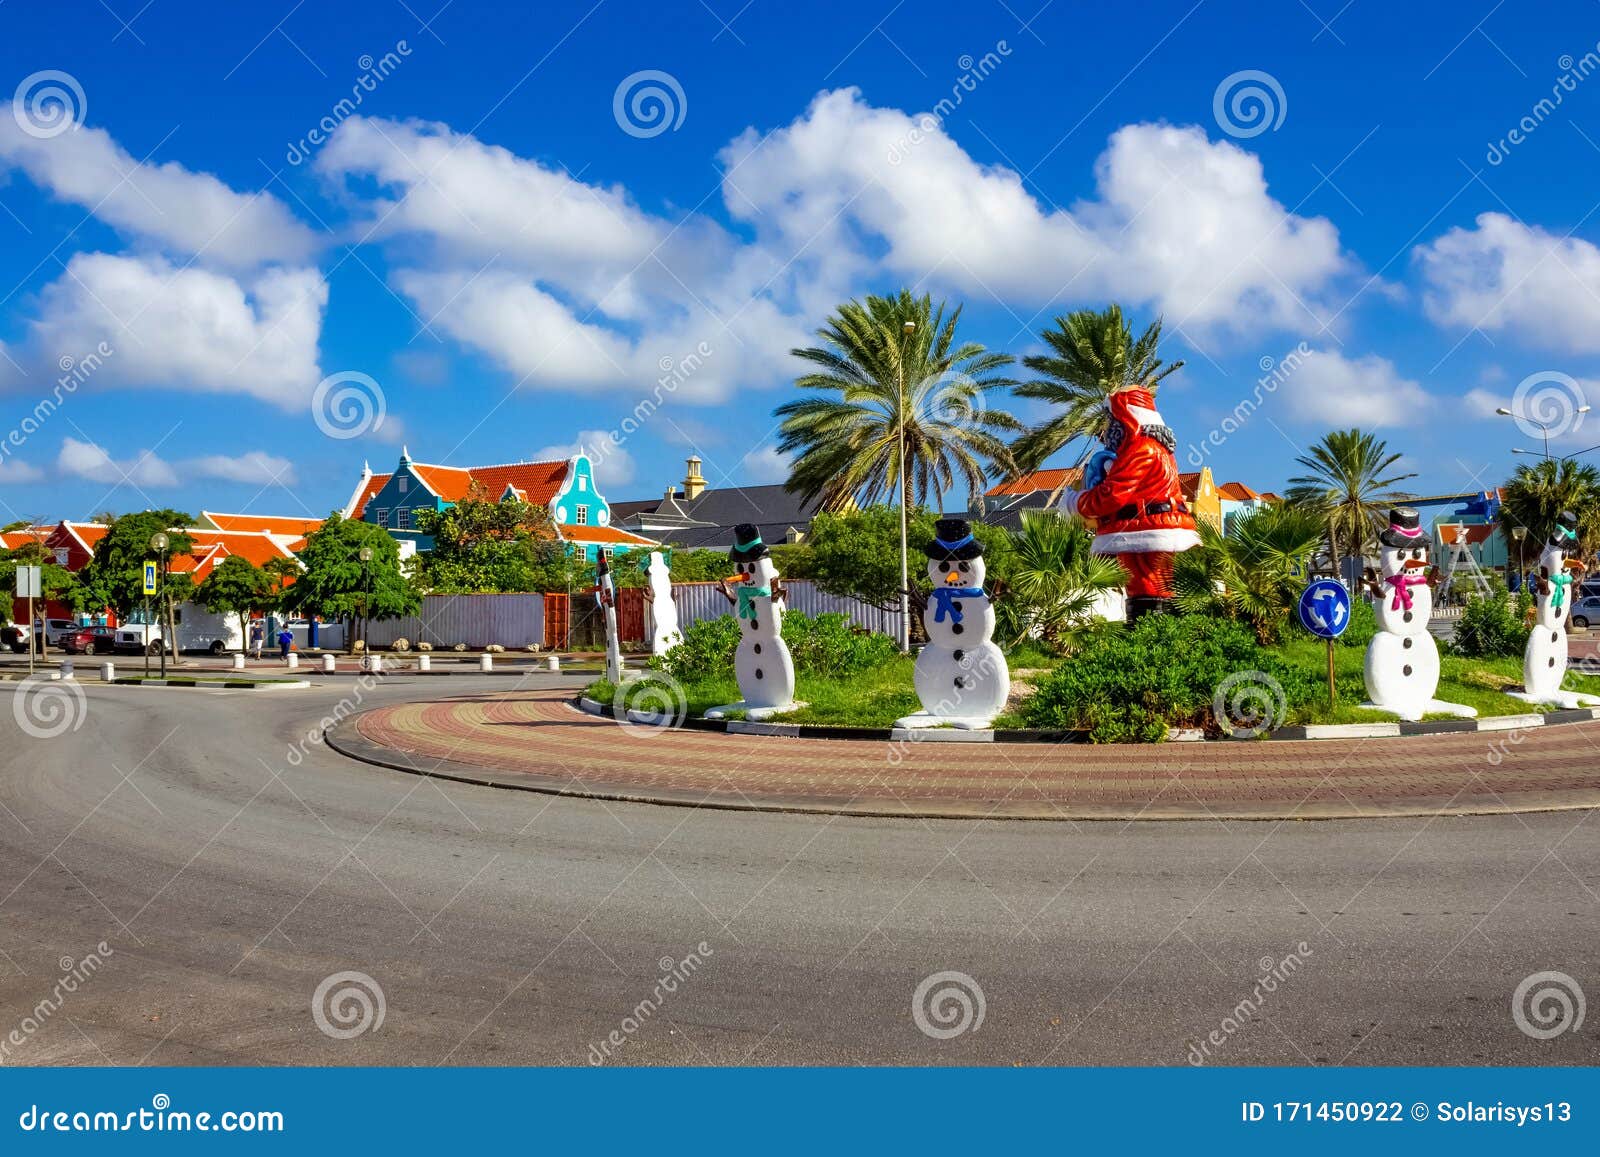 Christmas Decorations in Willemstad View Around the Caribbean Island  Curacao Stock Photo - Image of heritage, island: 171450922